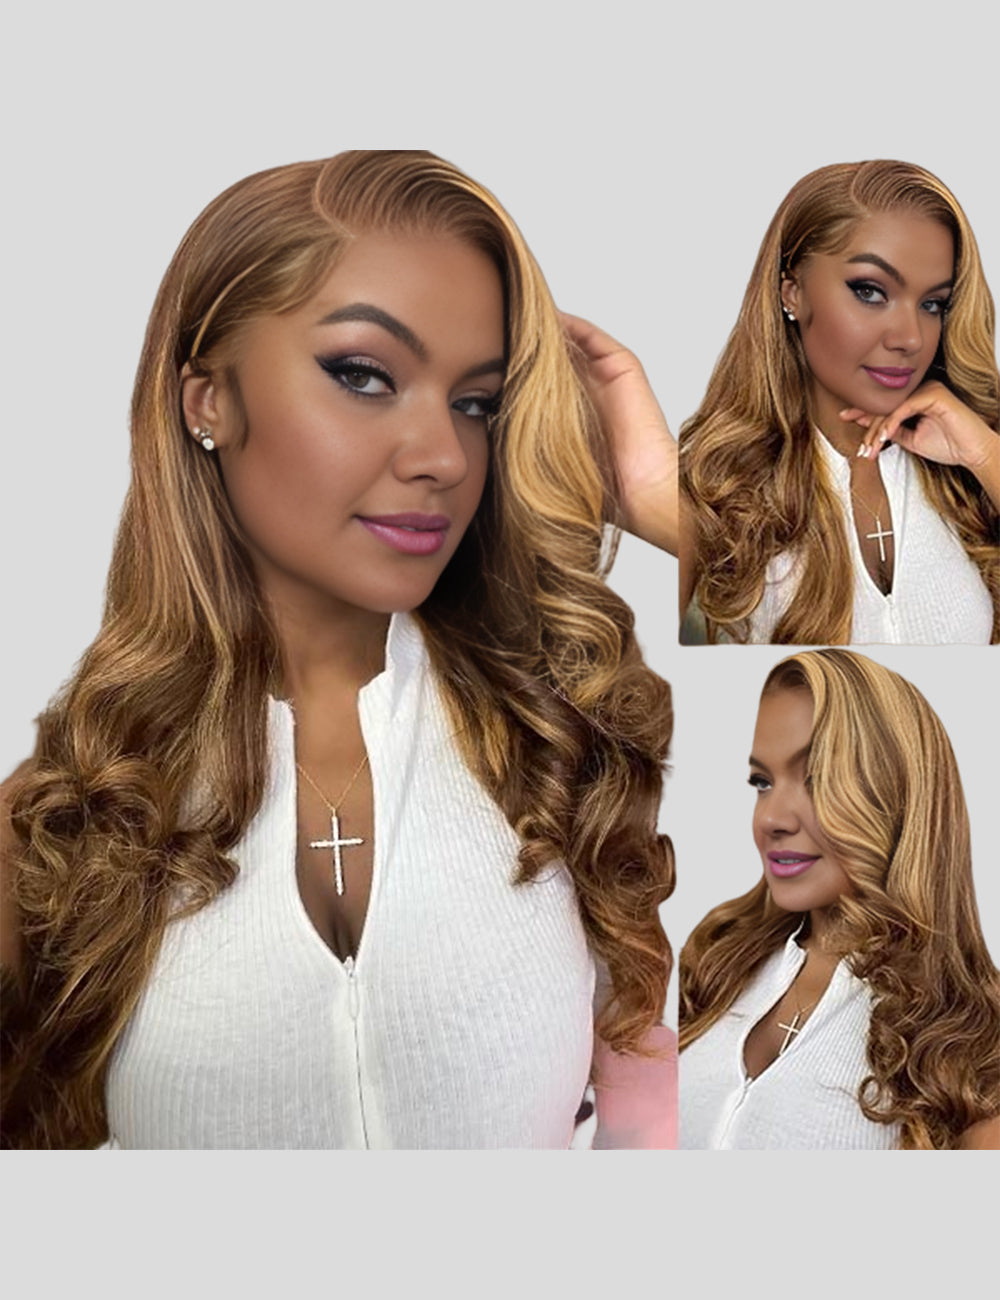 250% Density Balayage Highlight Lace Wigs Body Wave Lace Front Wigs With Baby Hair